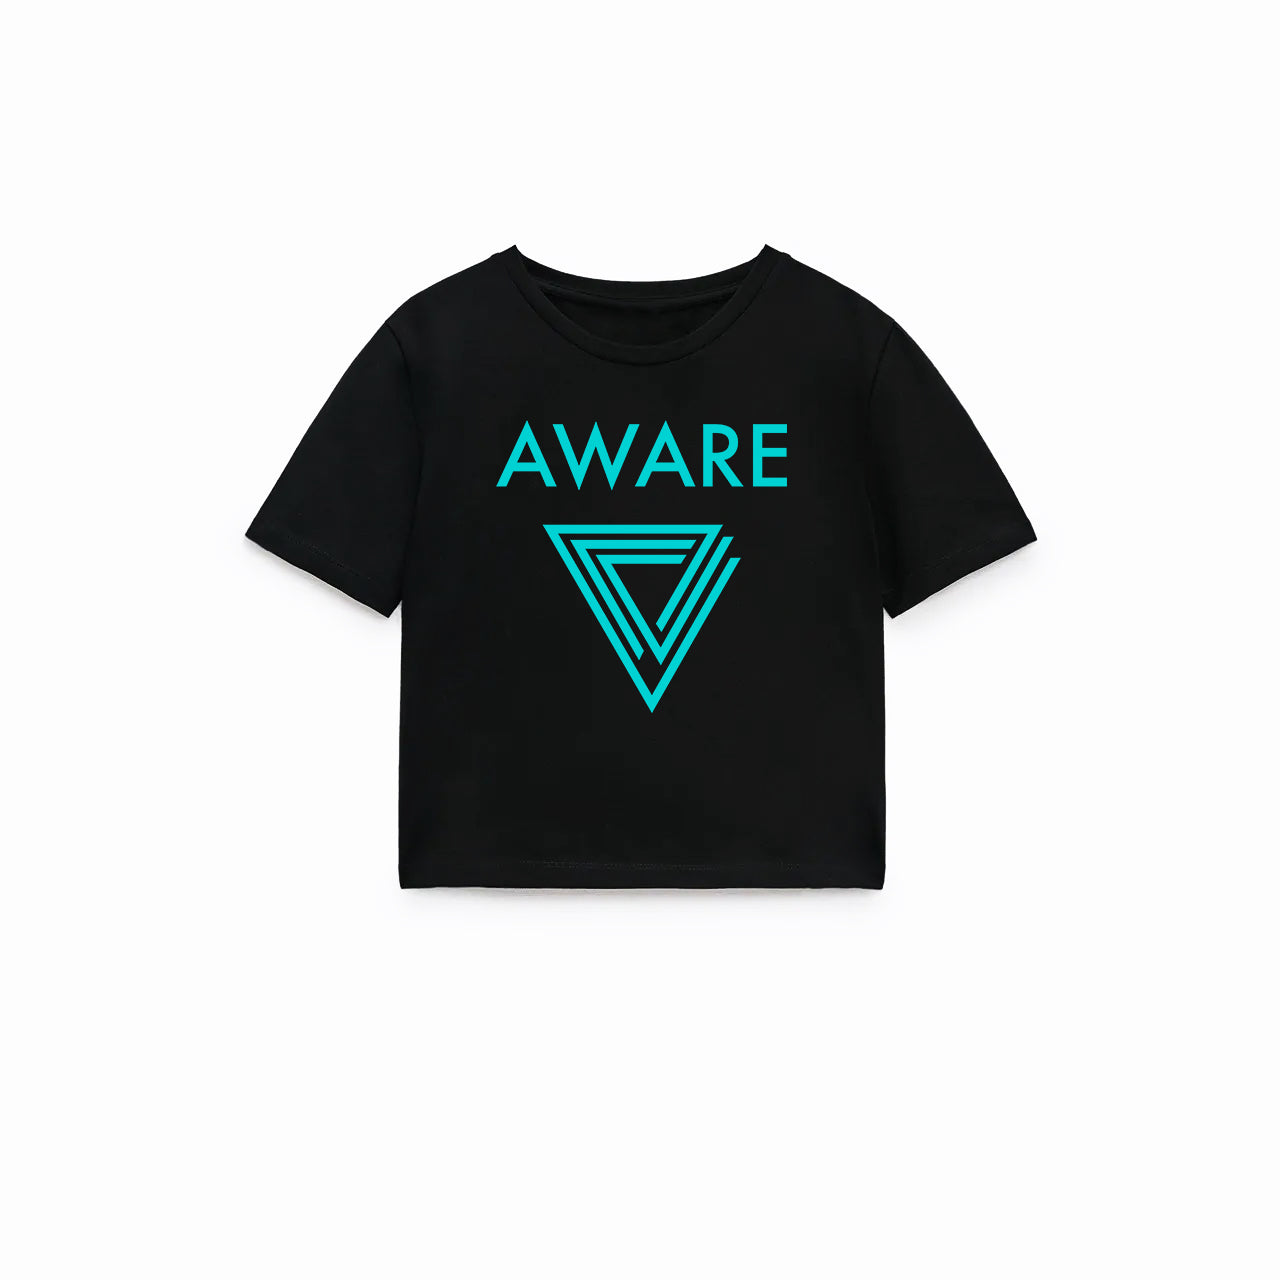 Teal AWARE Infinite Triangle Crop Top T-Shirts